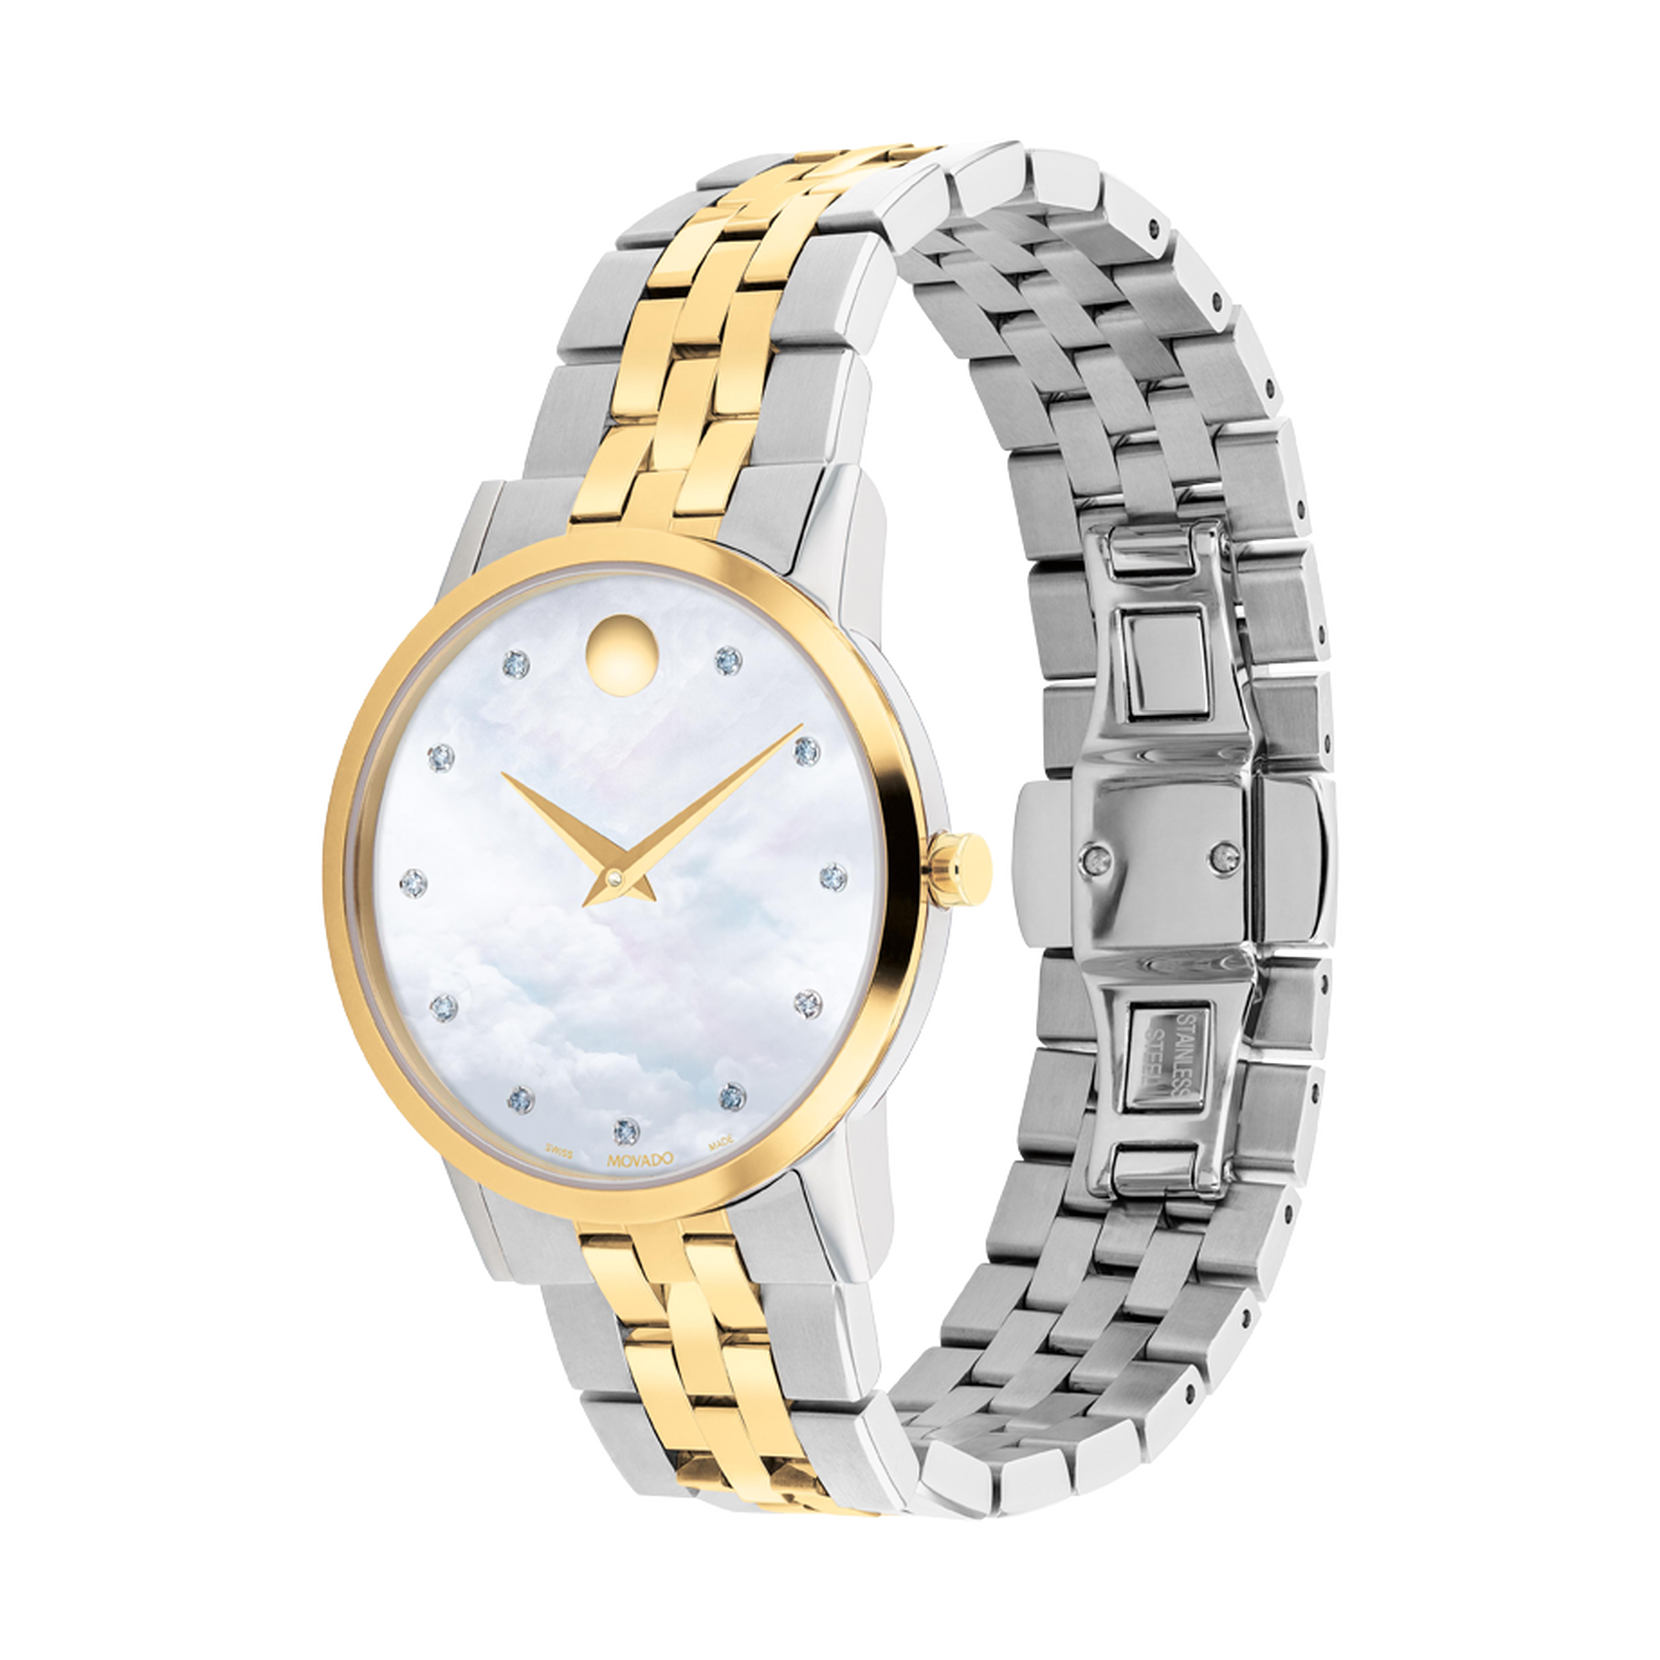 Movado | Museum Classic watch with two tone bracelet and green  mother-of-pearl dial